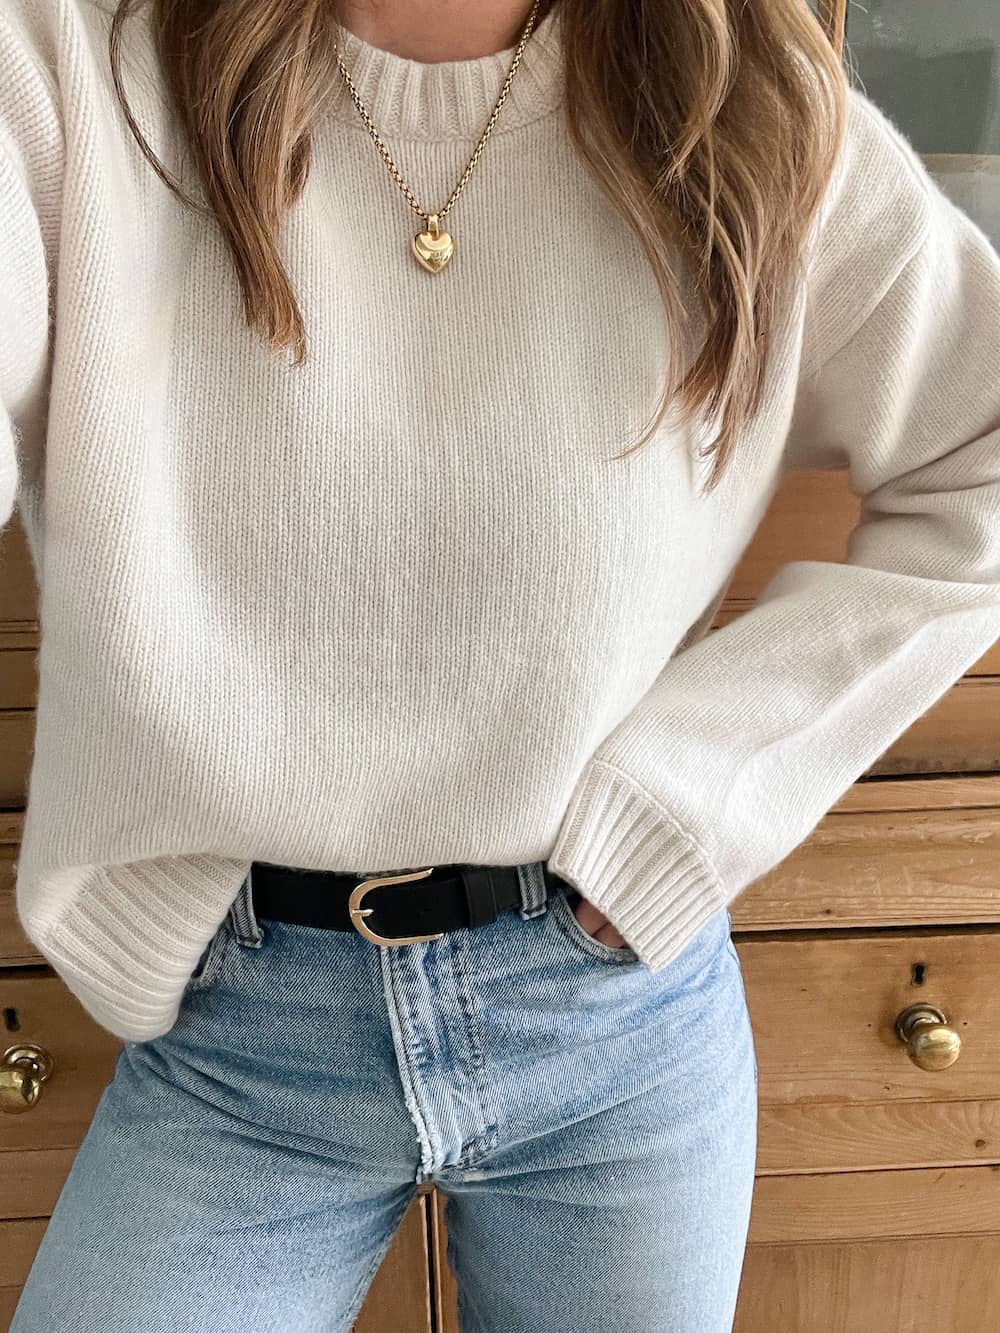 Christal wearing an ivory knit sweater from capsule wardrobe brand H&M with a black belt and blue jeans